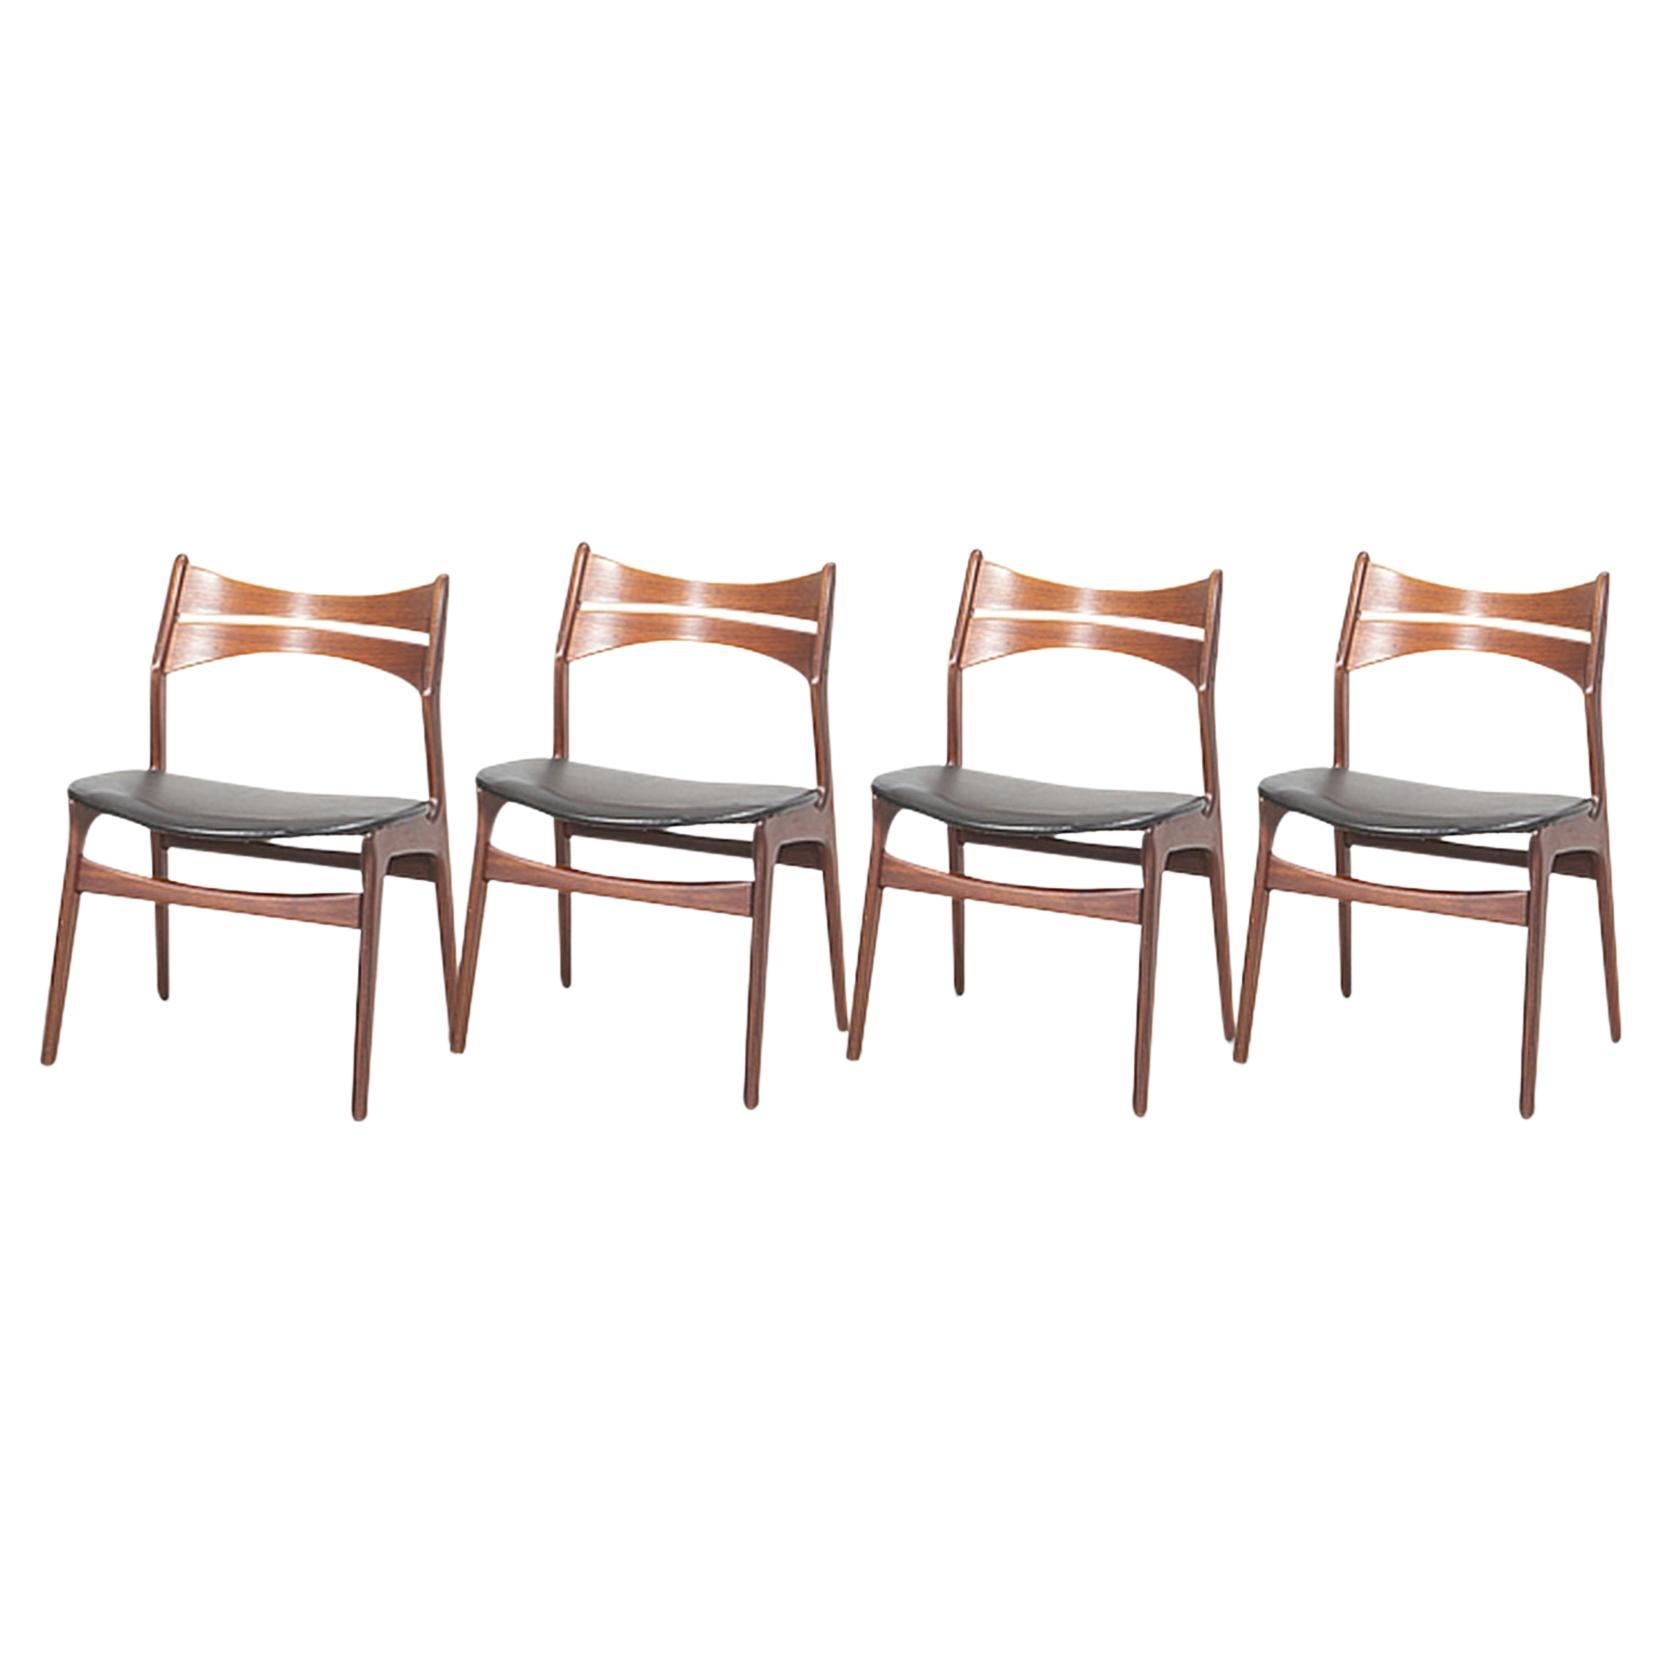 Set of Four Erik Buch Model 310 Dining Chairs in Teak